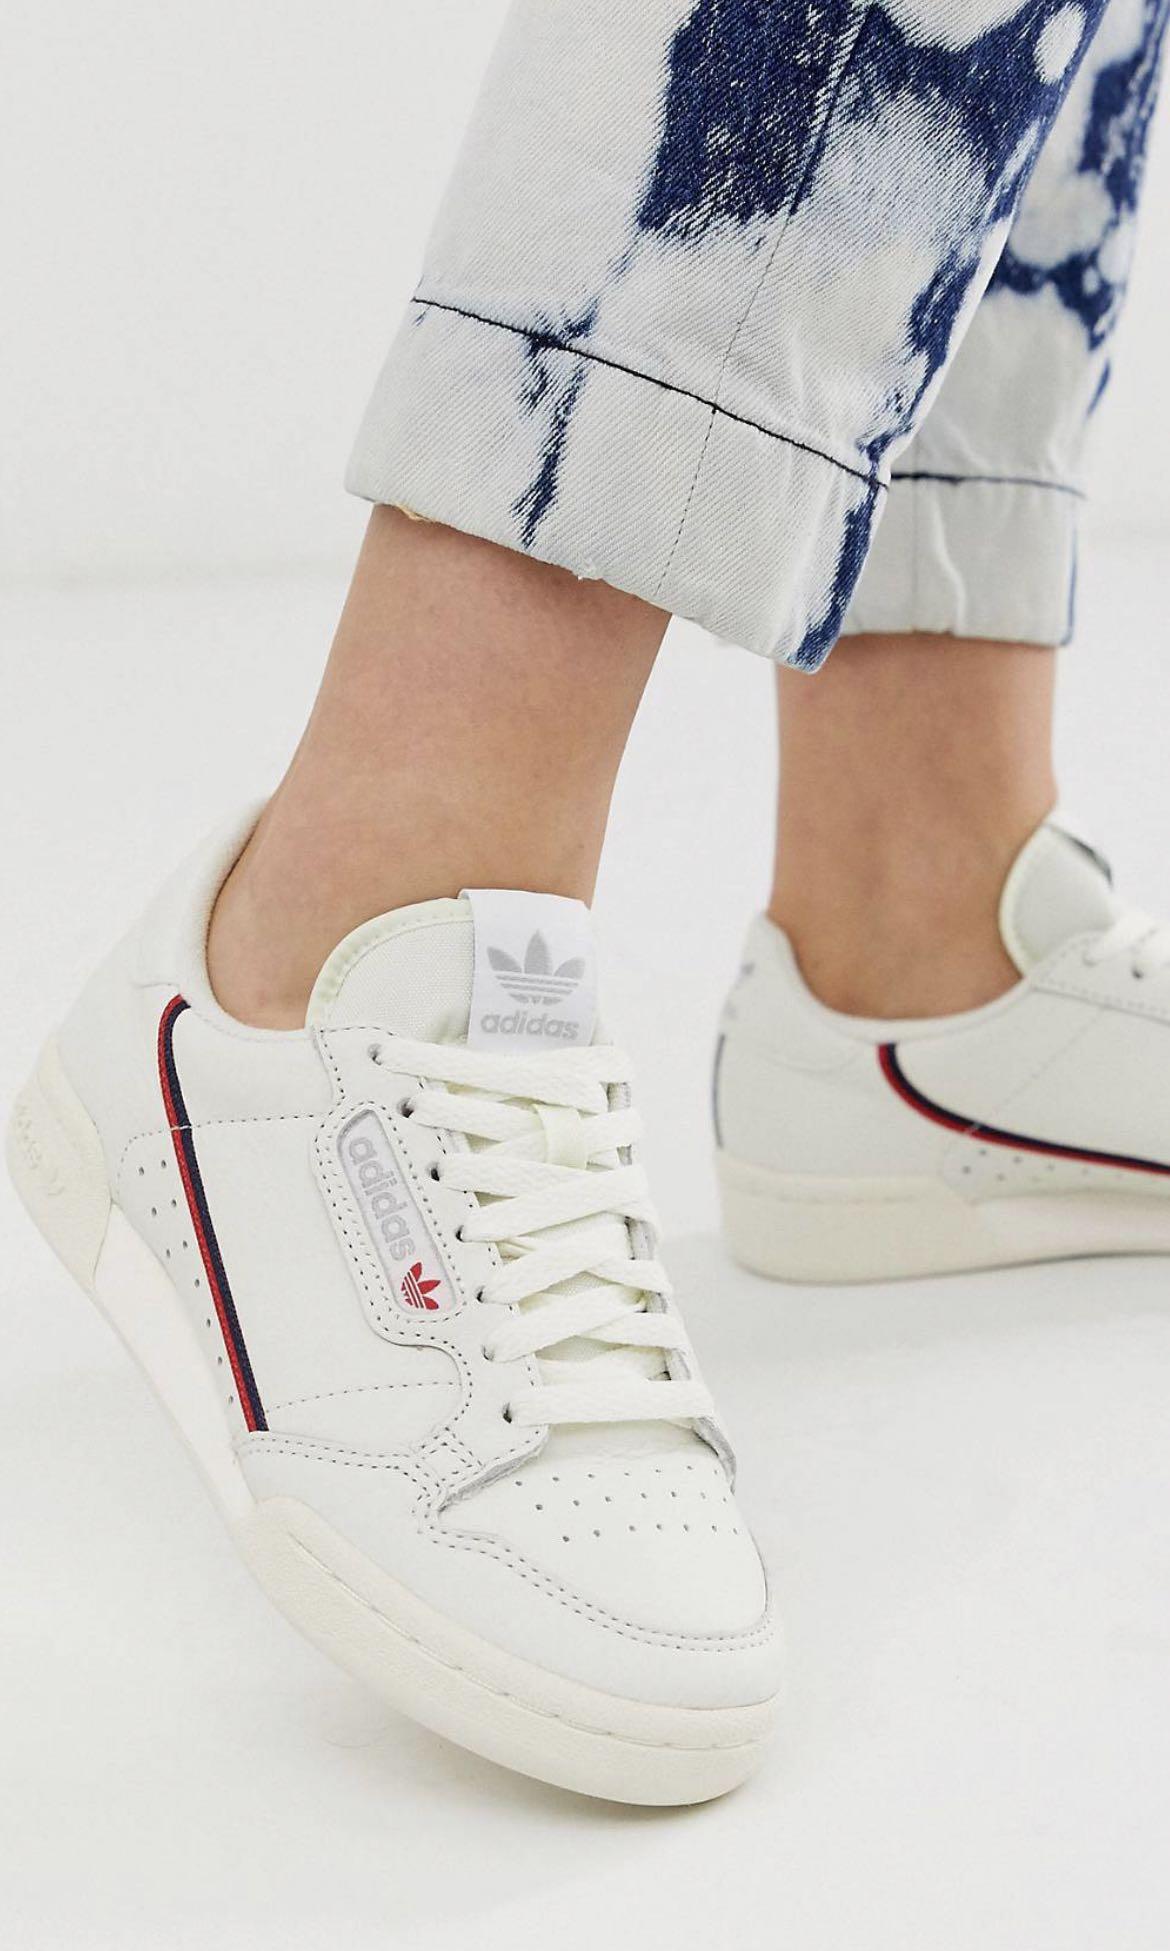 Adidas Originals trainer in off white and red, Women's Fashion, Footwear, Sneakers Carousell